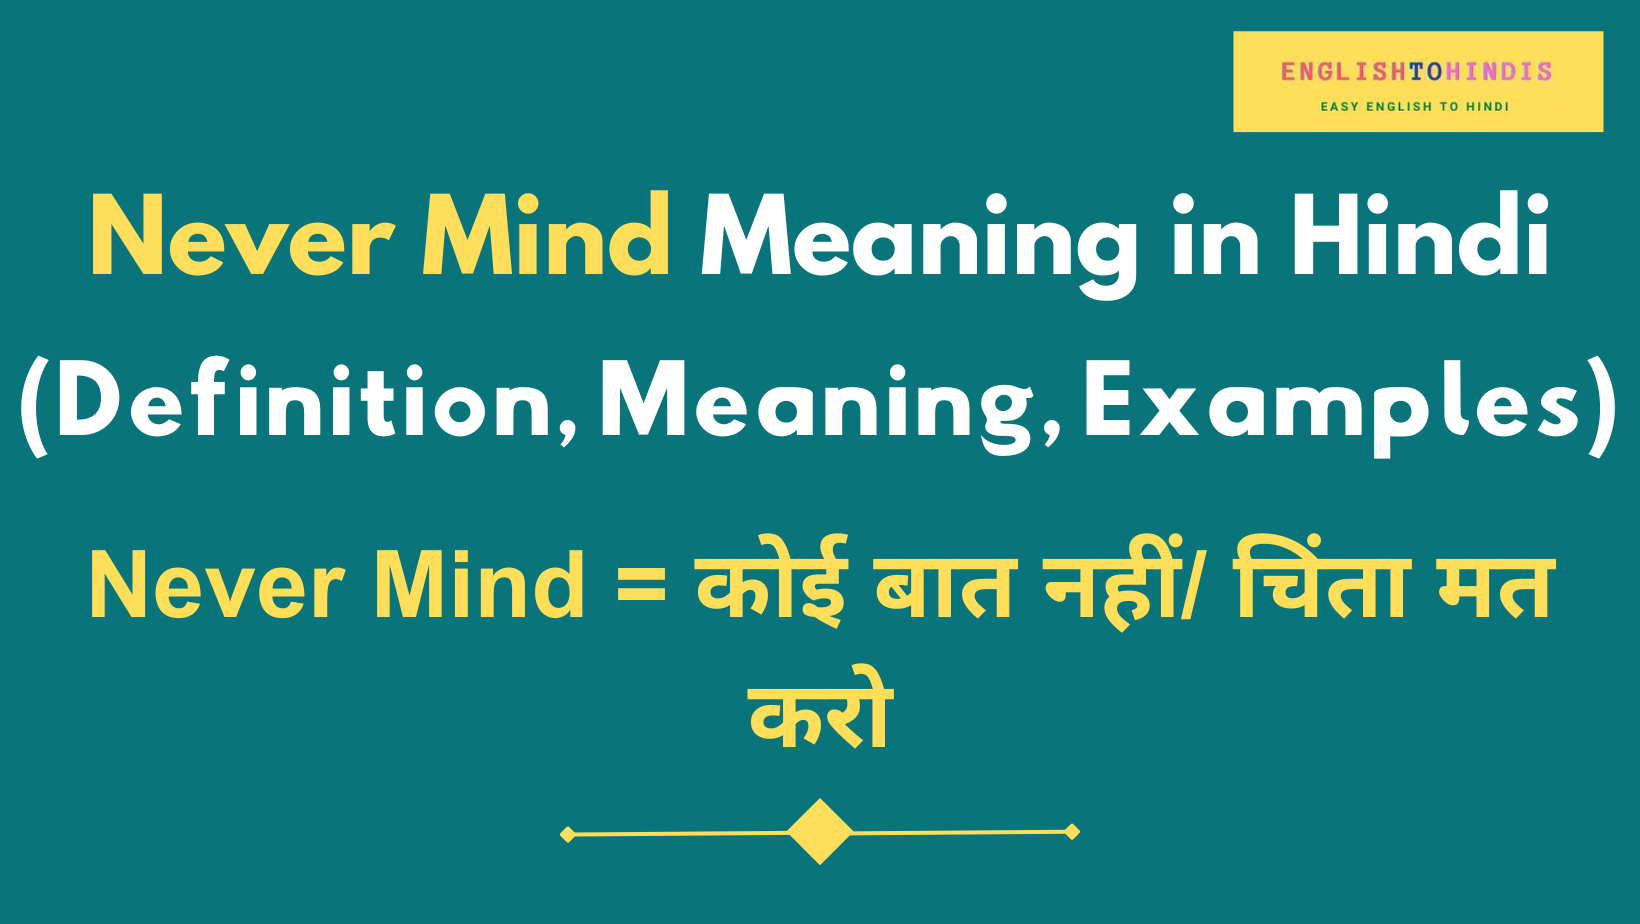 Never Mind Meaning in Hindi